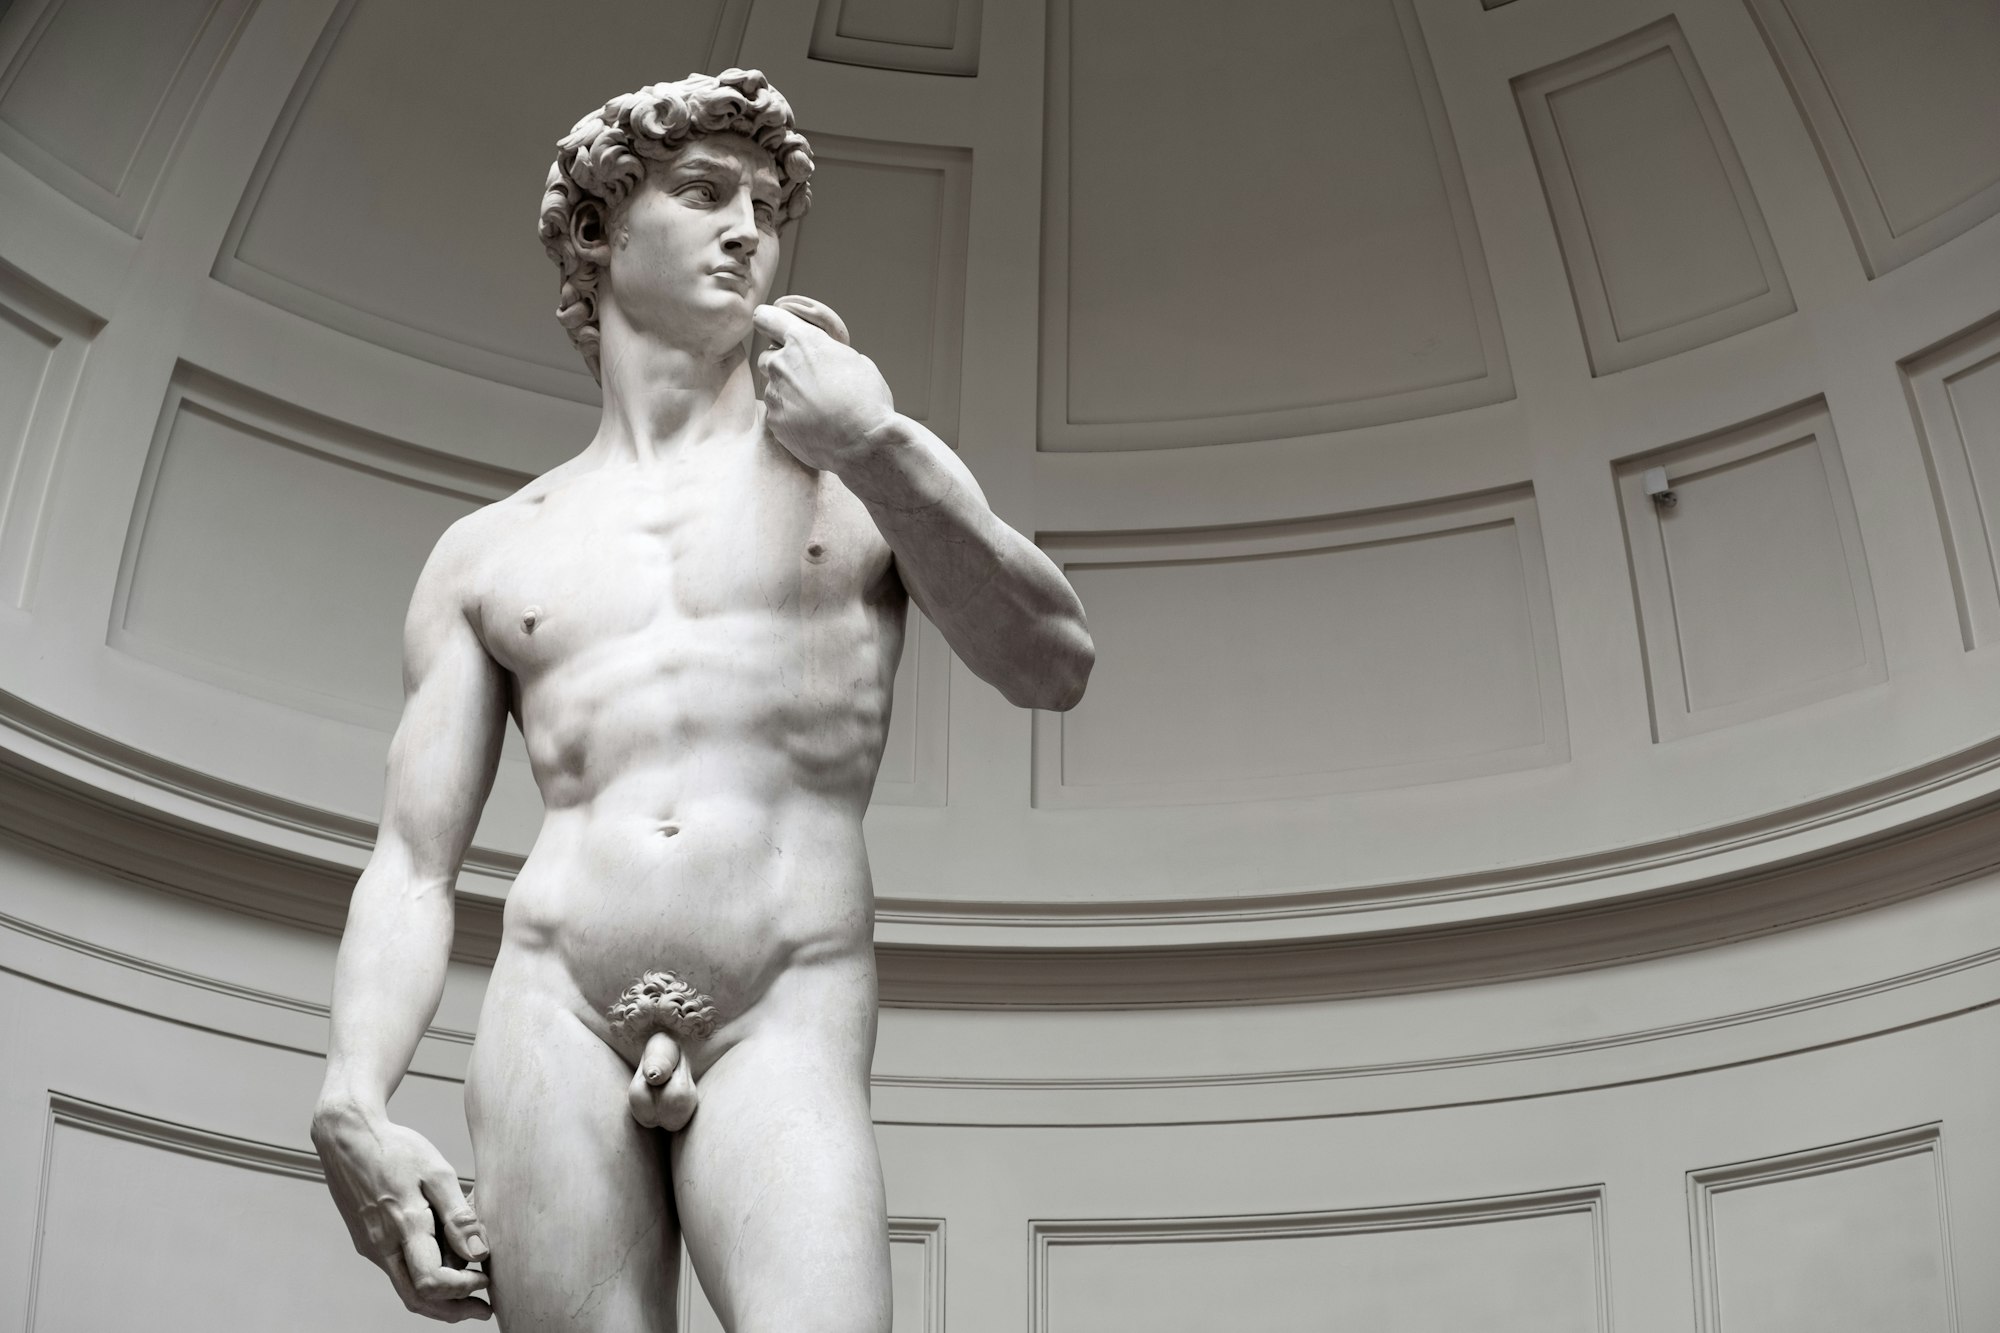 David is a masterpiece of Renaissance sculpture created in marble between 1501 and 1504 by the Italian artist Michelangelo.